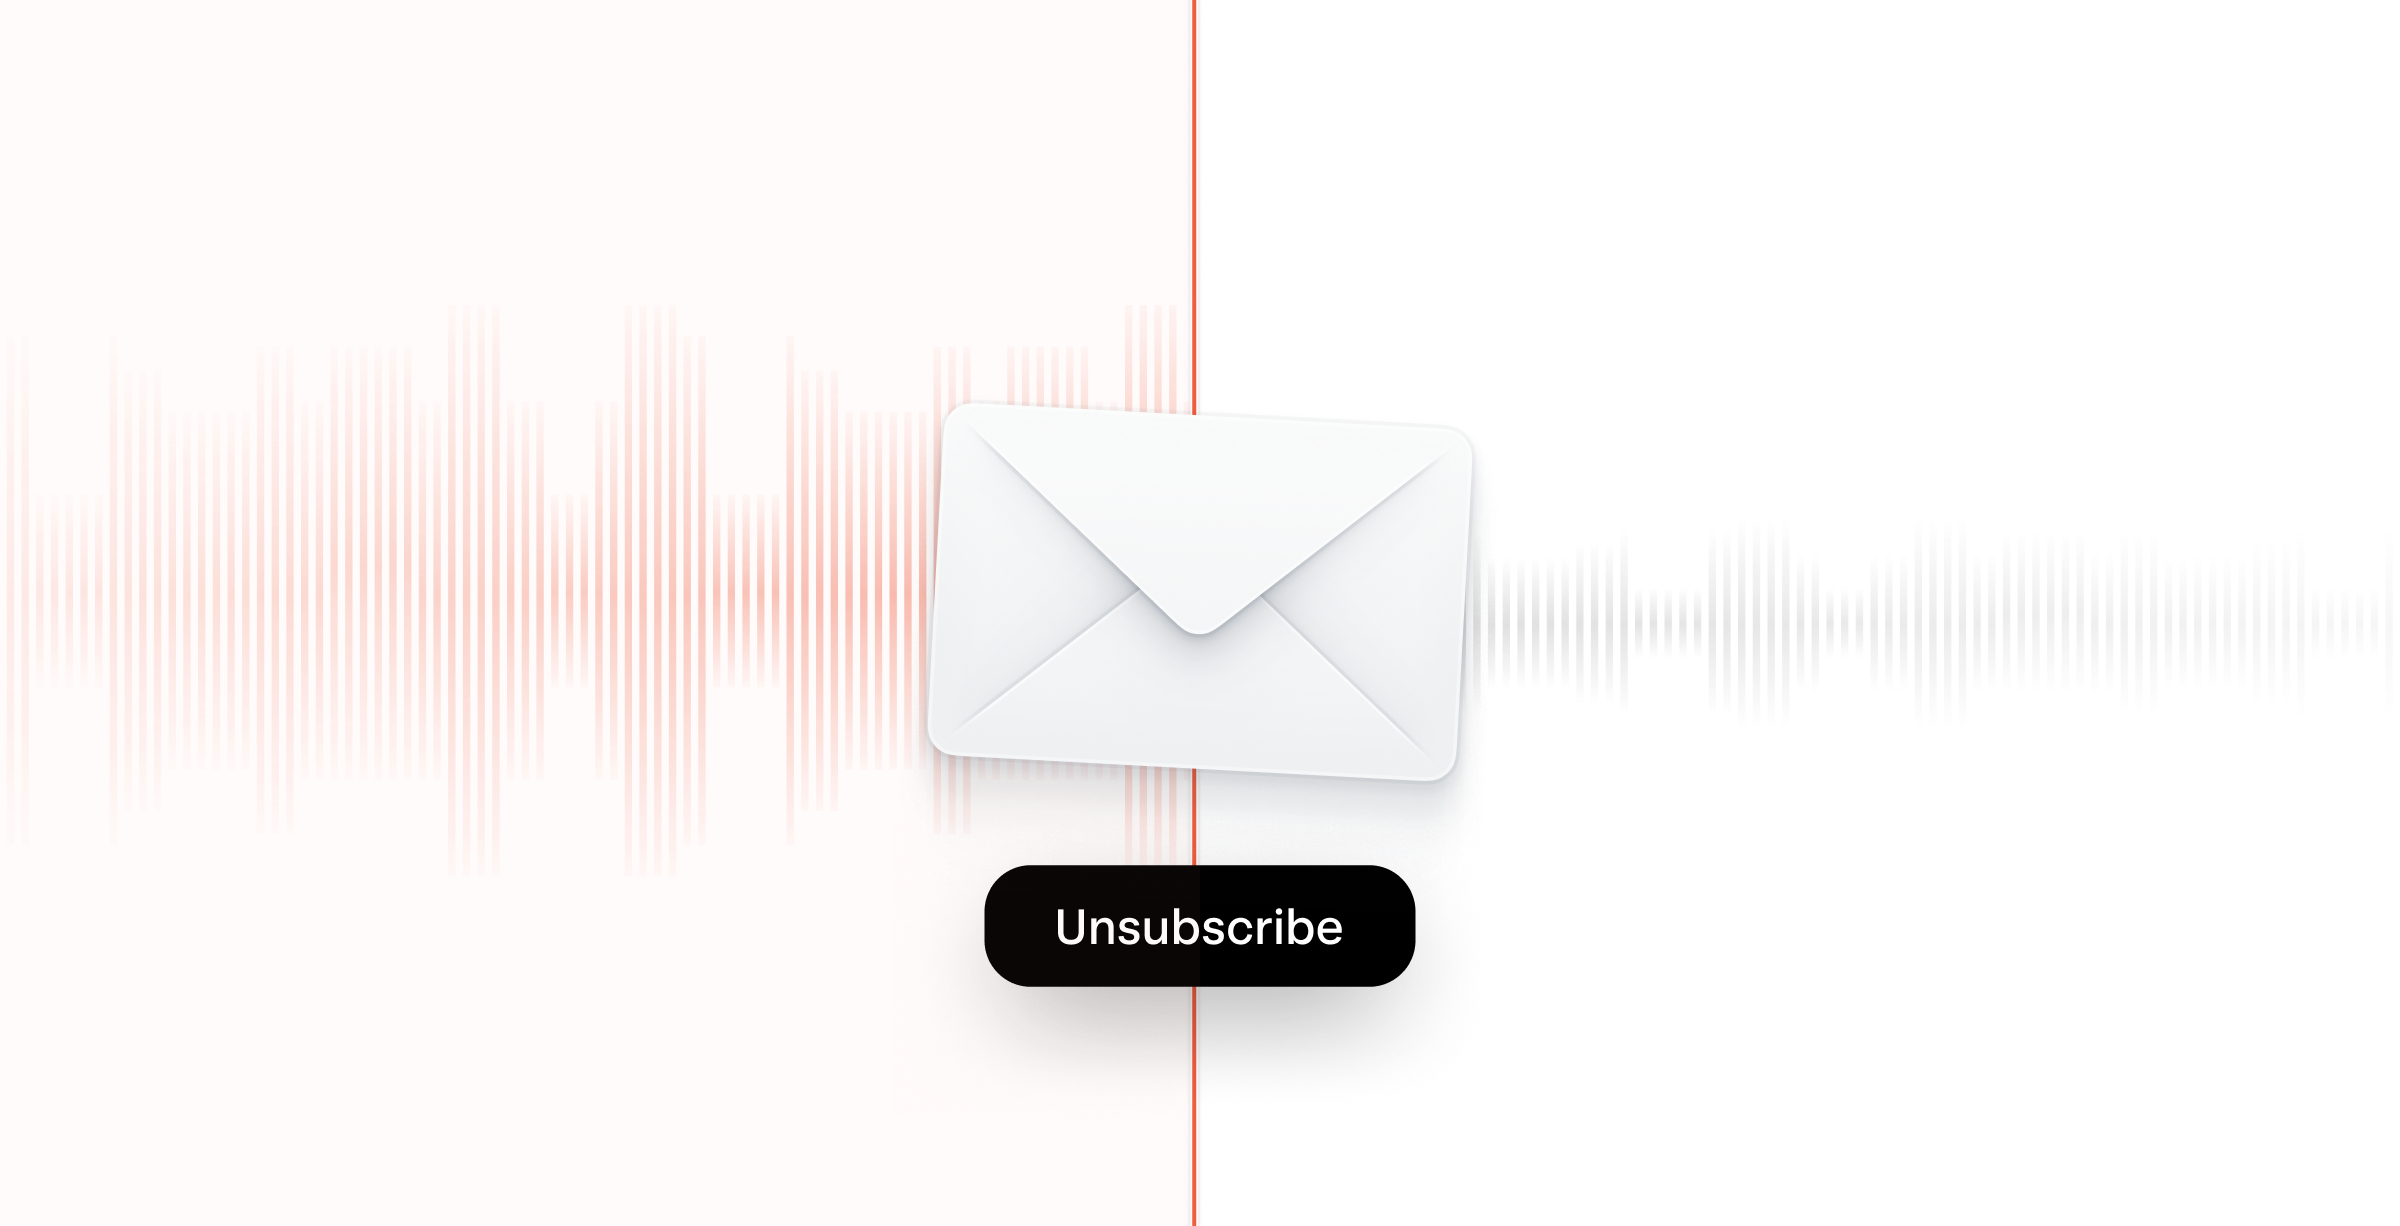 Email unsubscribe graphic image.